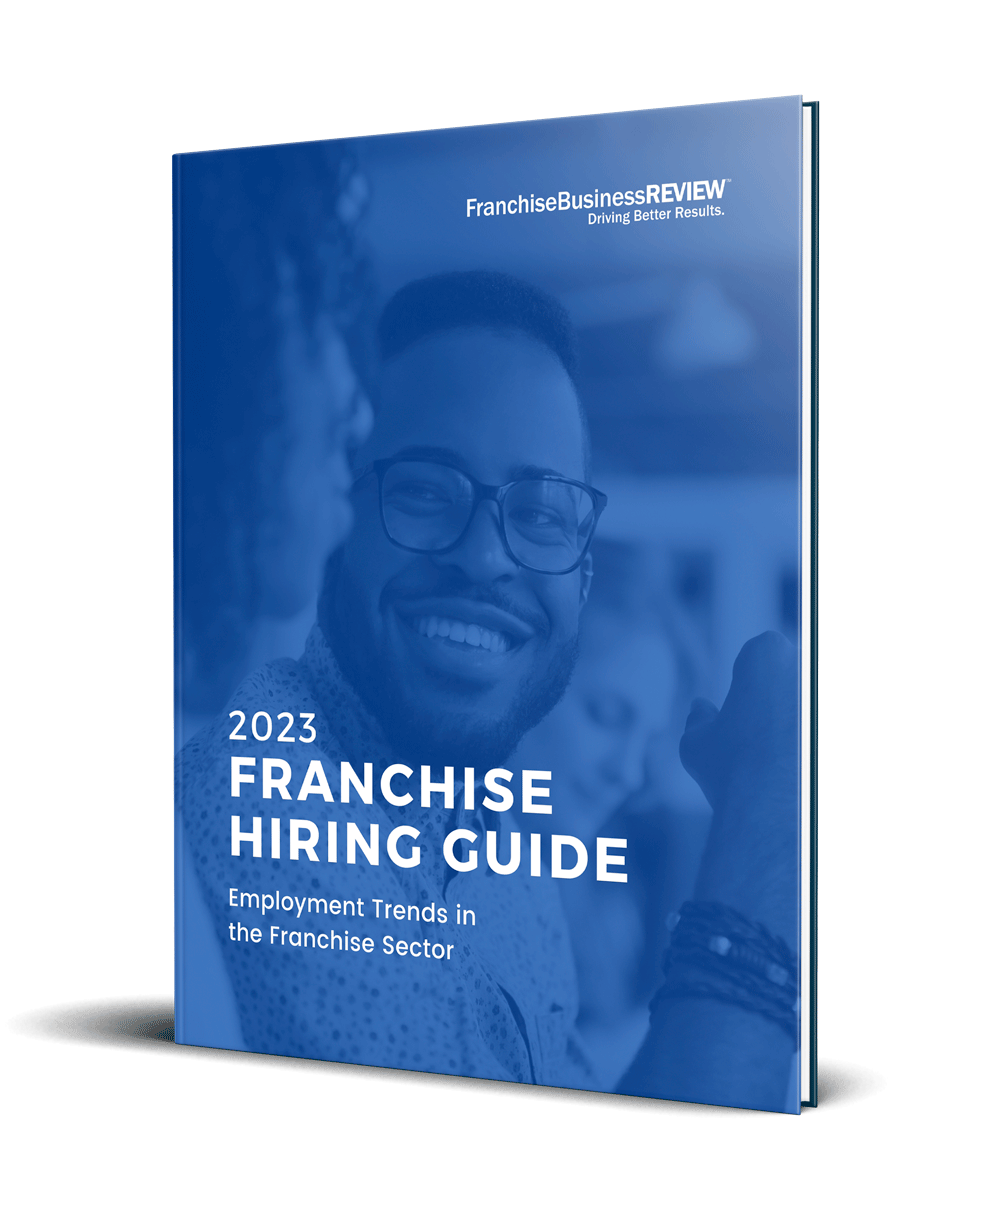 hiring guide cover